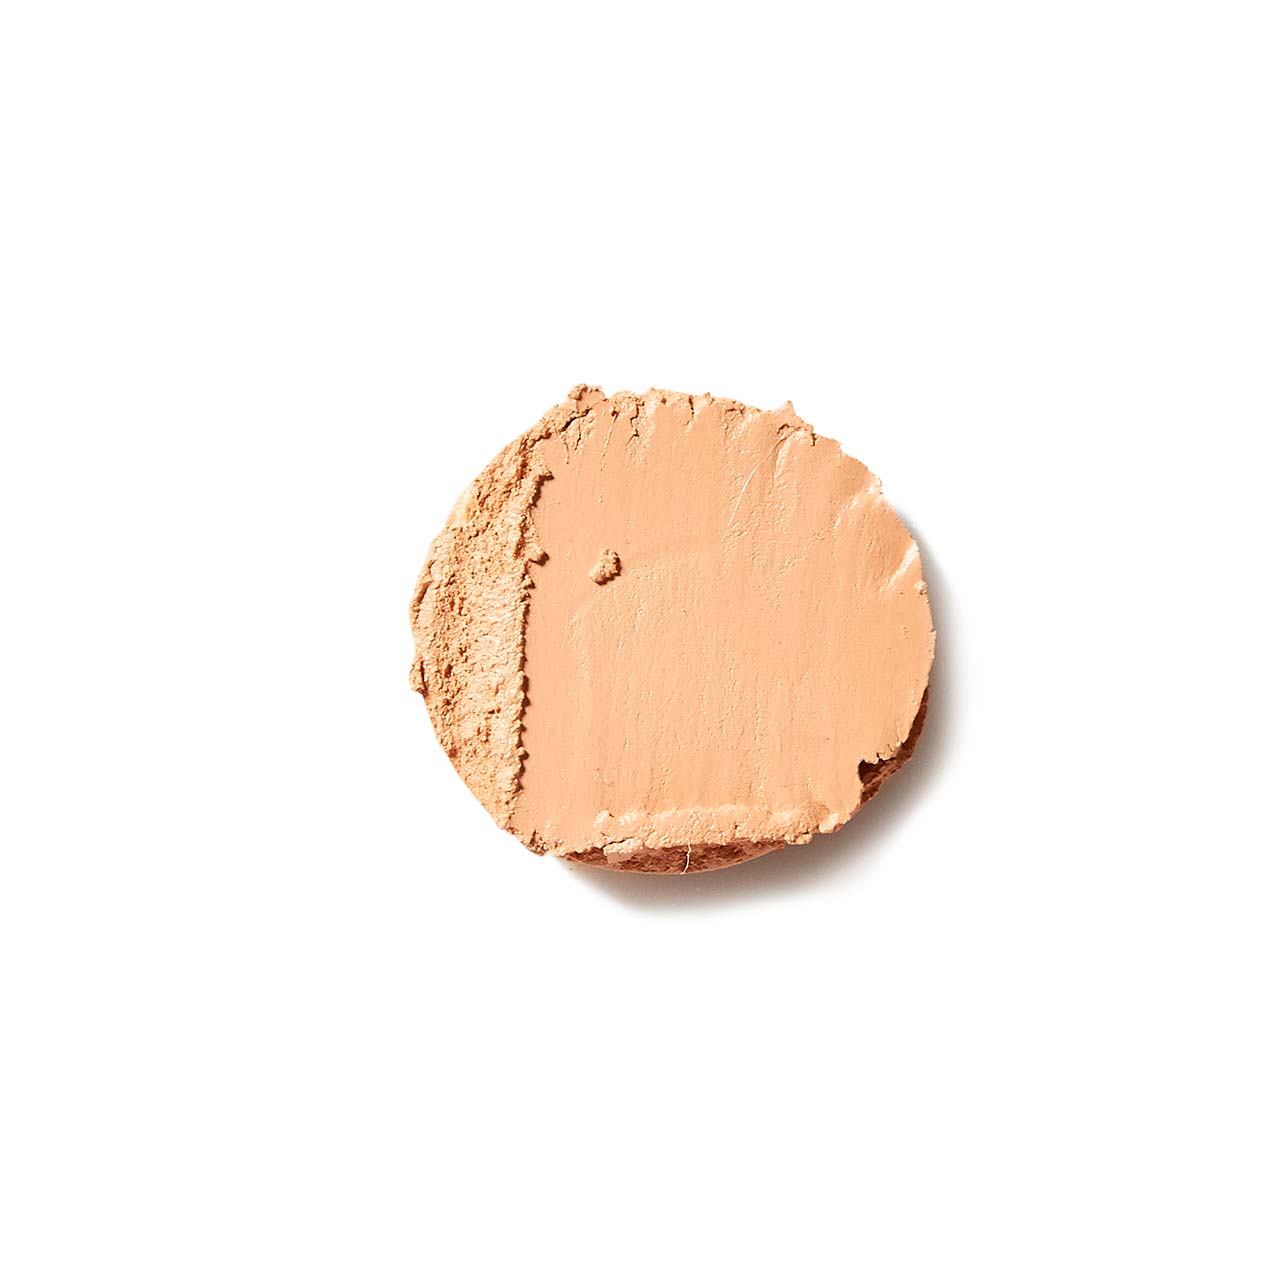 No. 04: The Neutralizer! Light orange for covering bluish tones—your pick for under eye circles